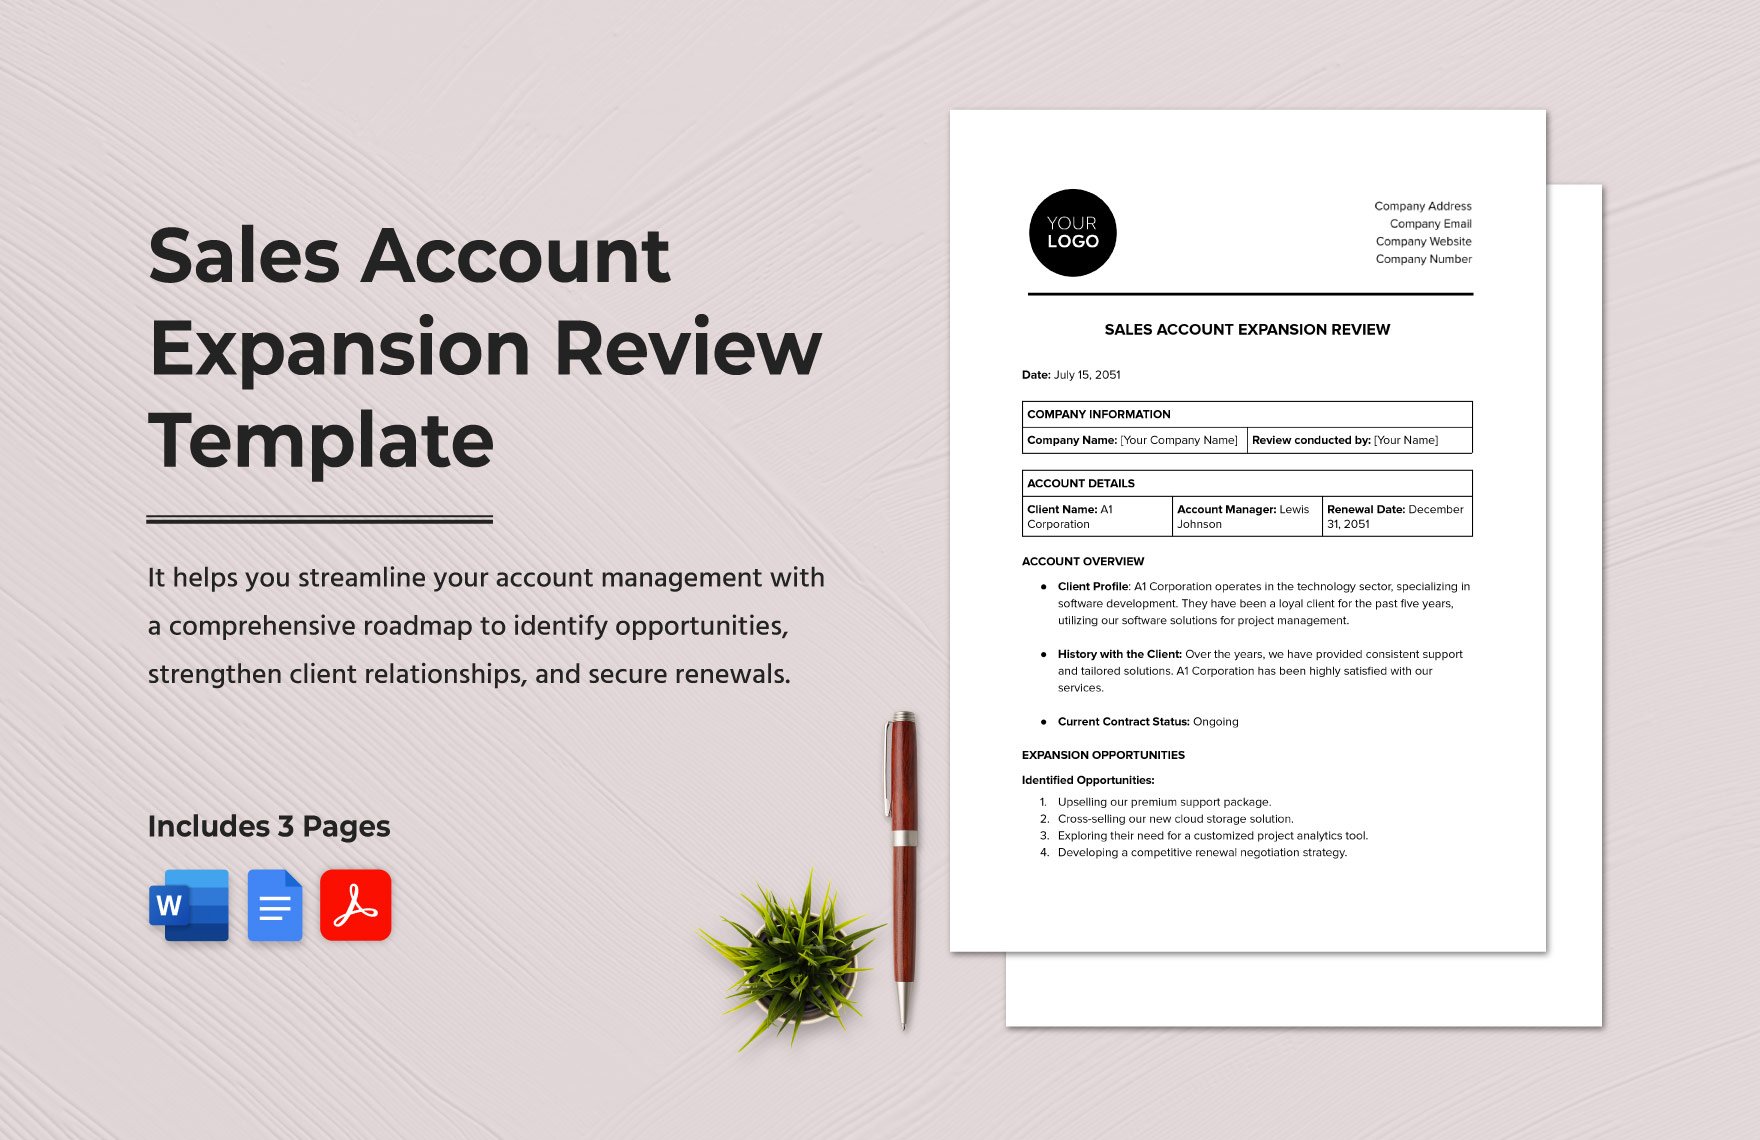  Sales Account Expansion Review Template